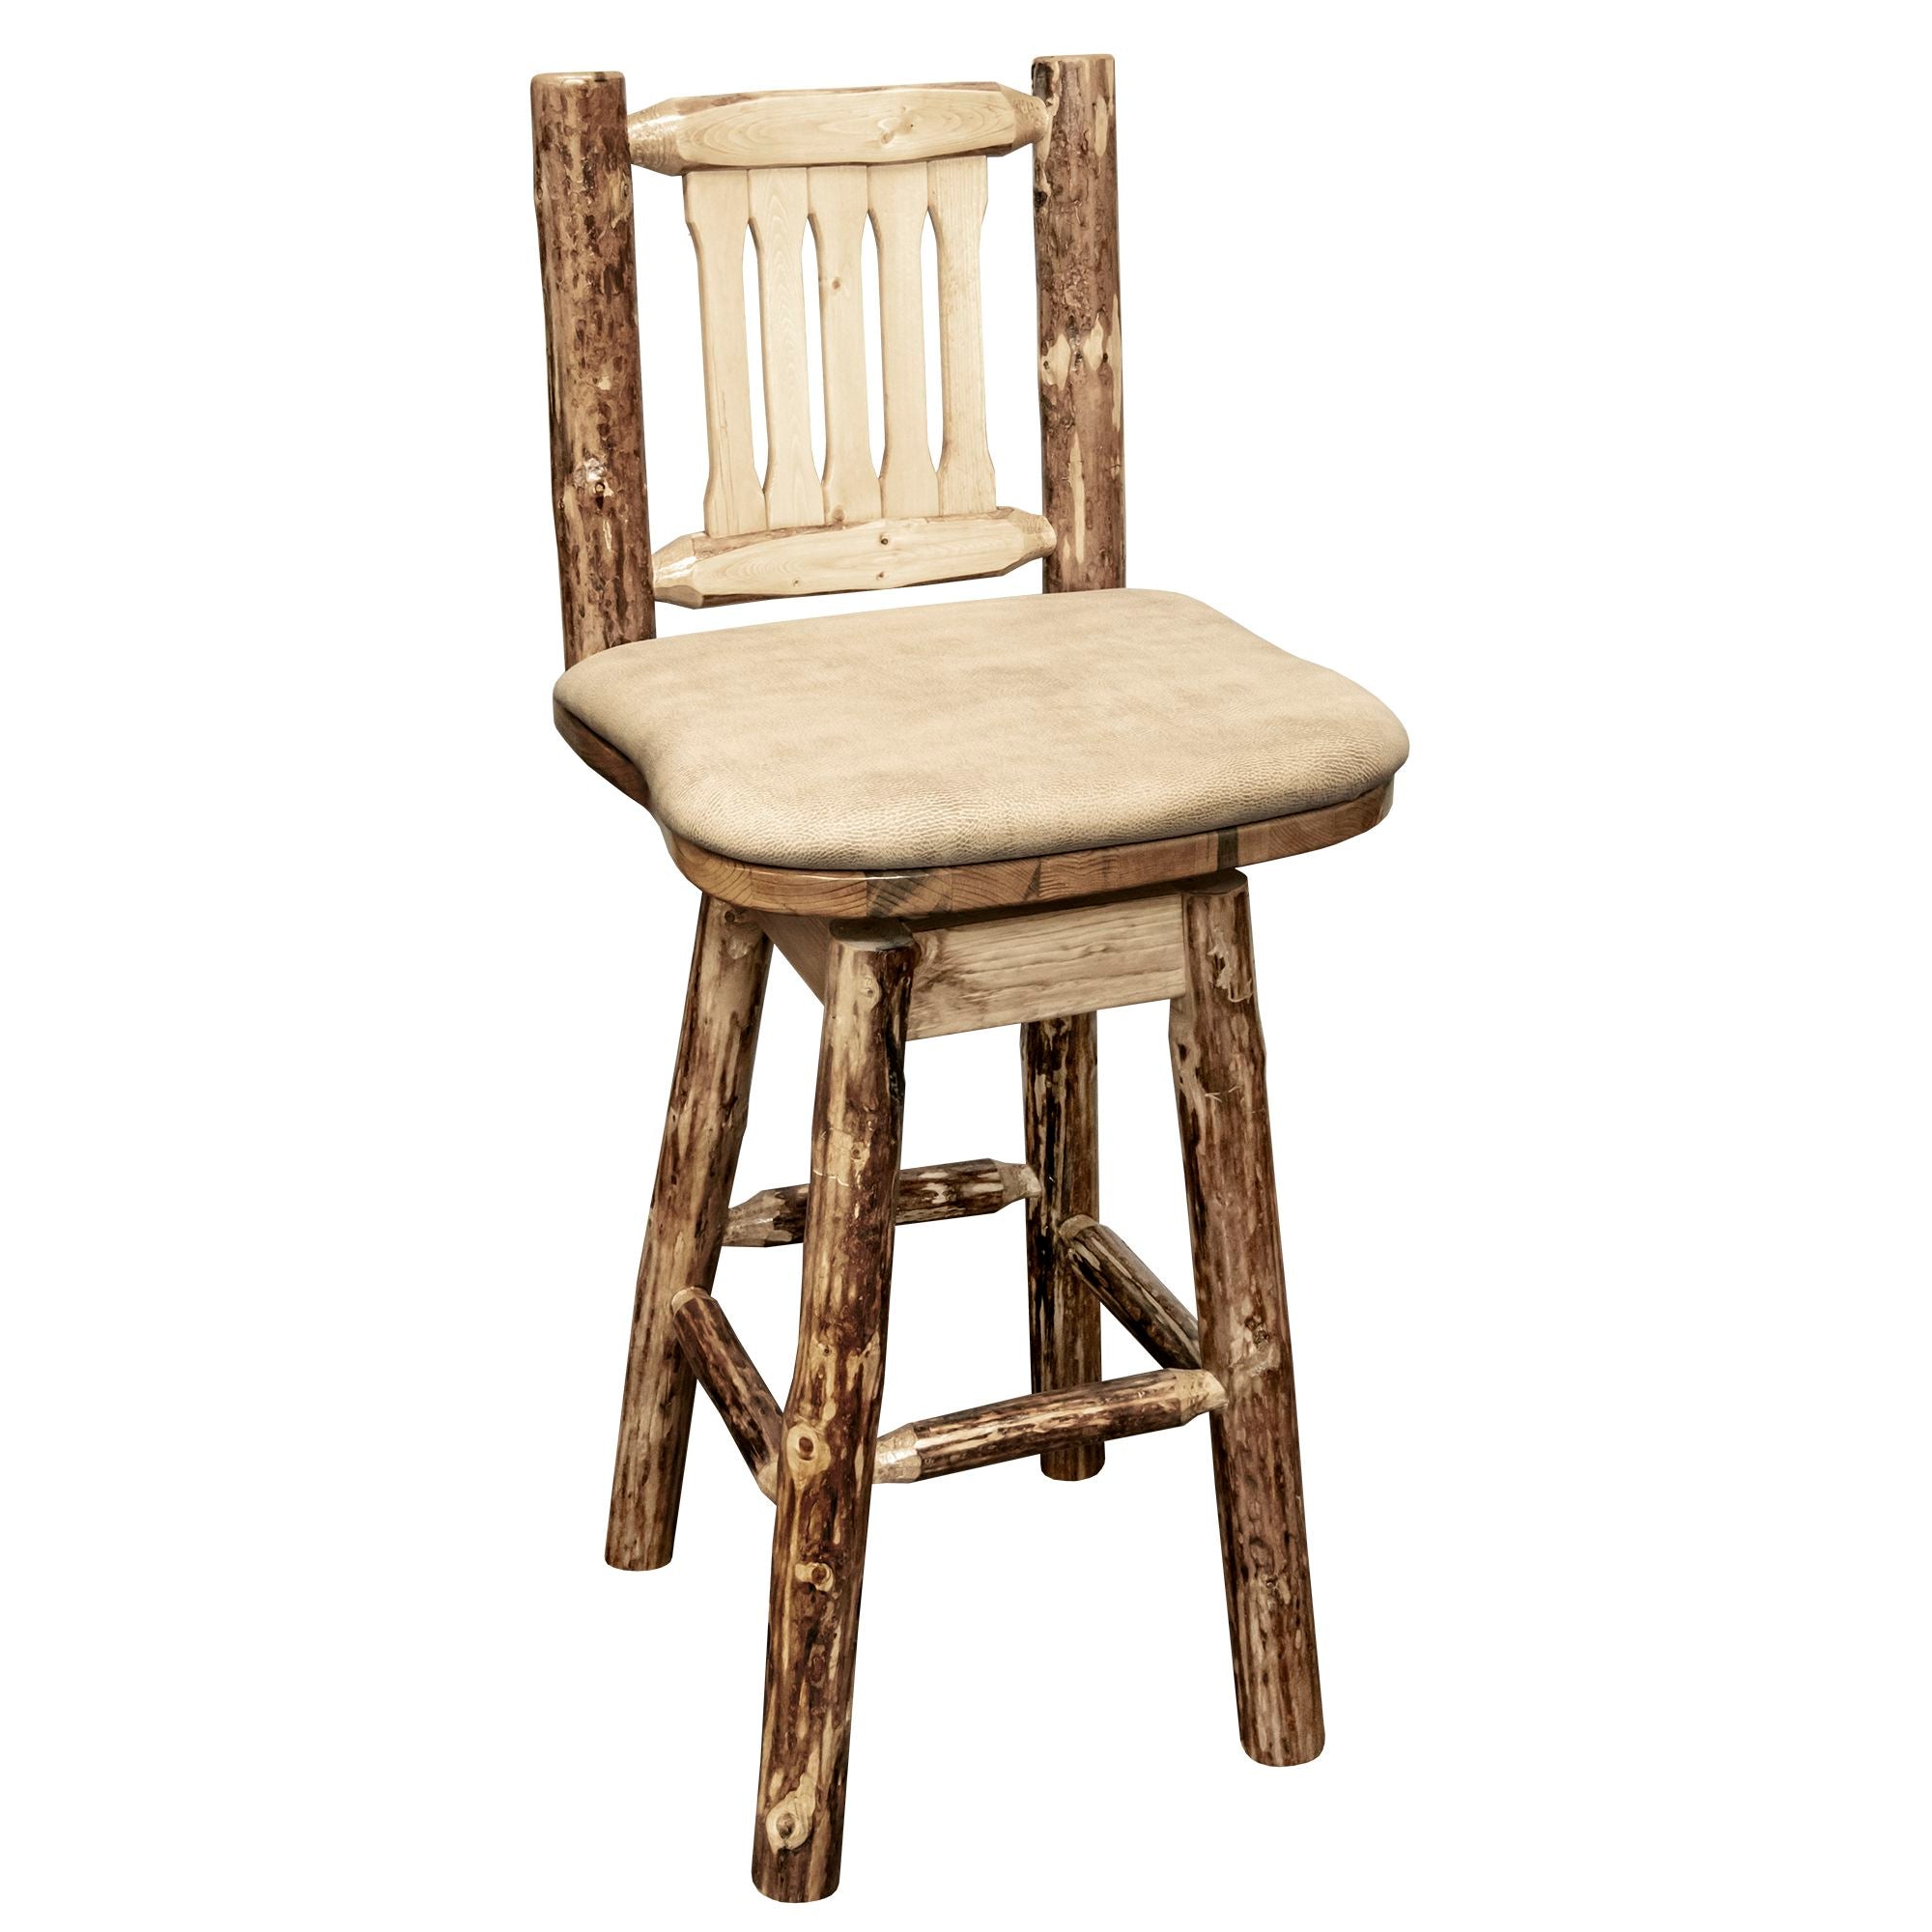 montana woodworks glacier country collection-barstool with back swivel mwgcbswsnrbuck buckskin patter upholstered seat